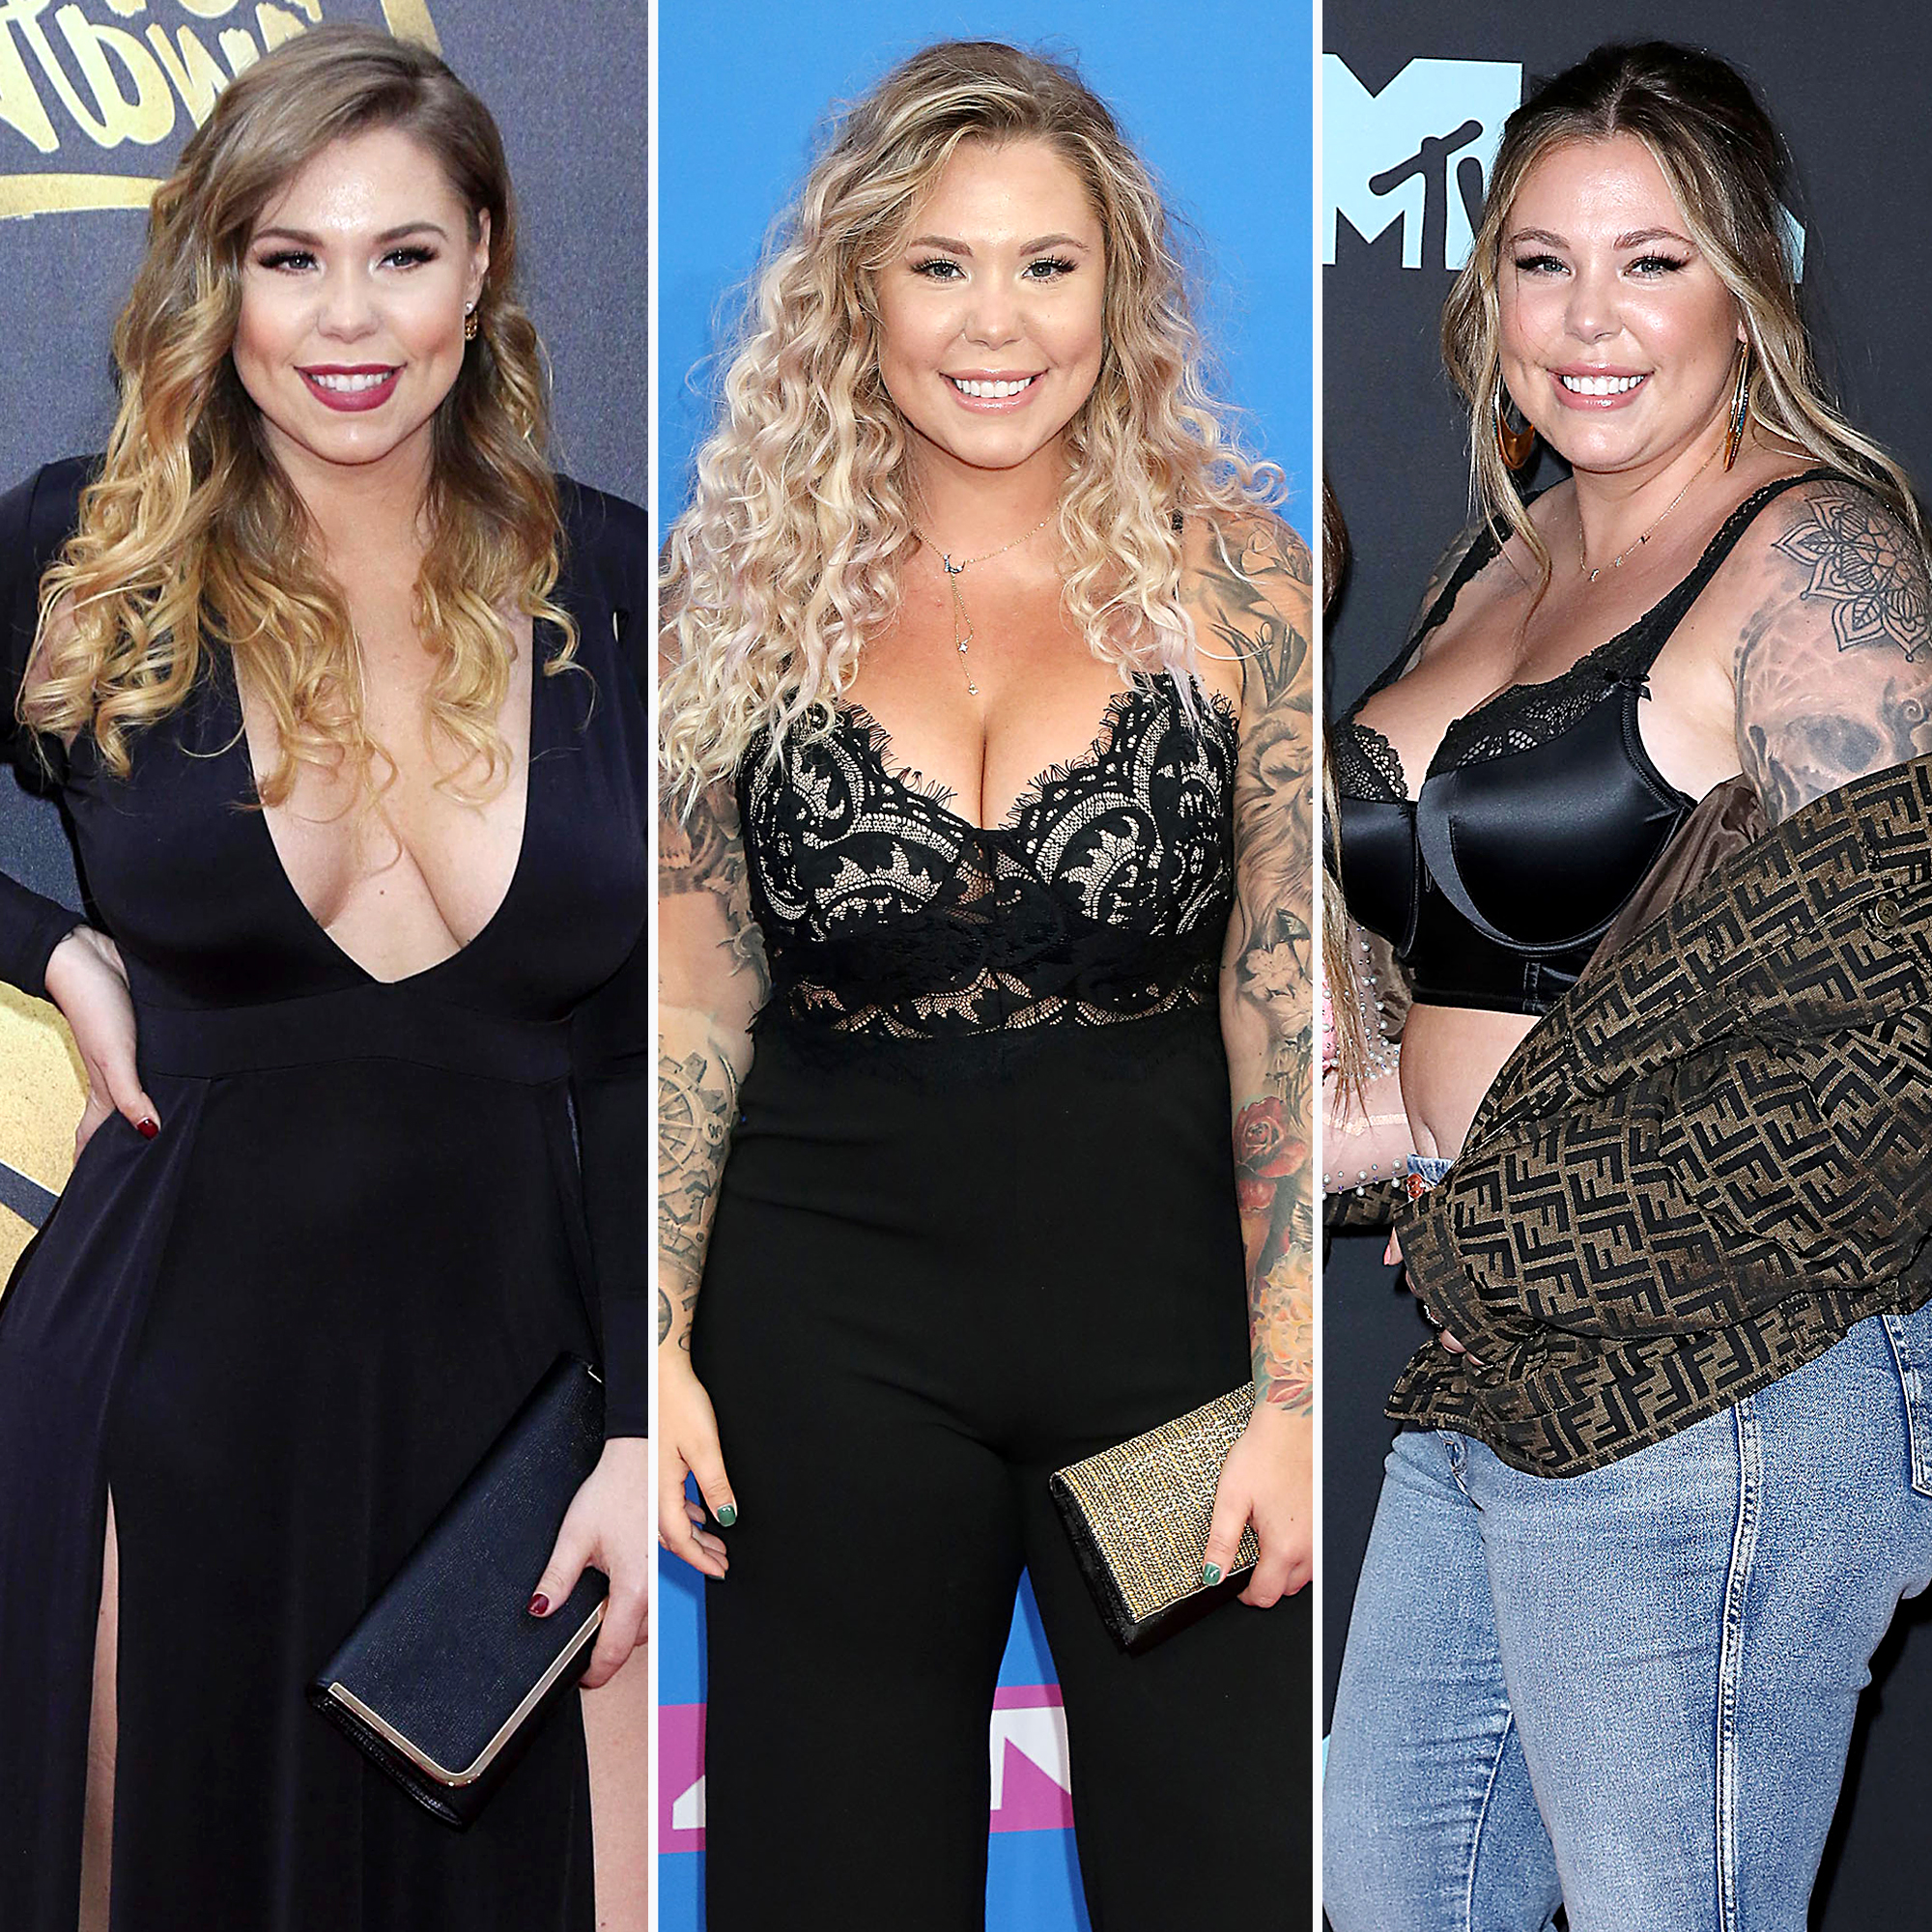 Kailyn Lowrys Plastic Surgery Transformation Before and After Pics image